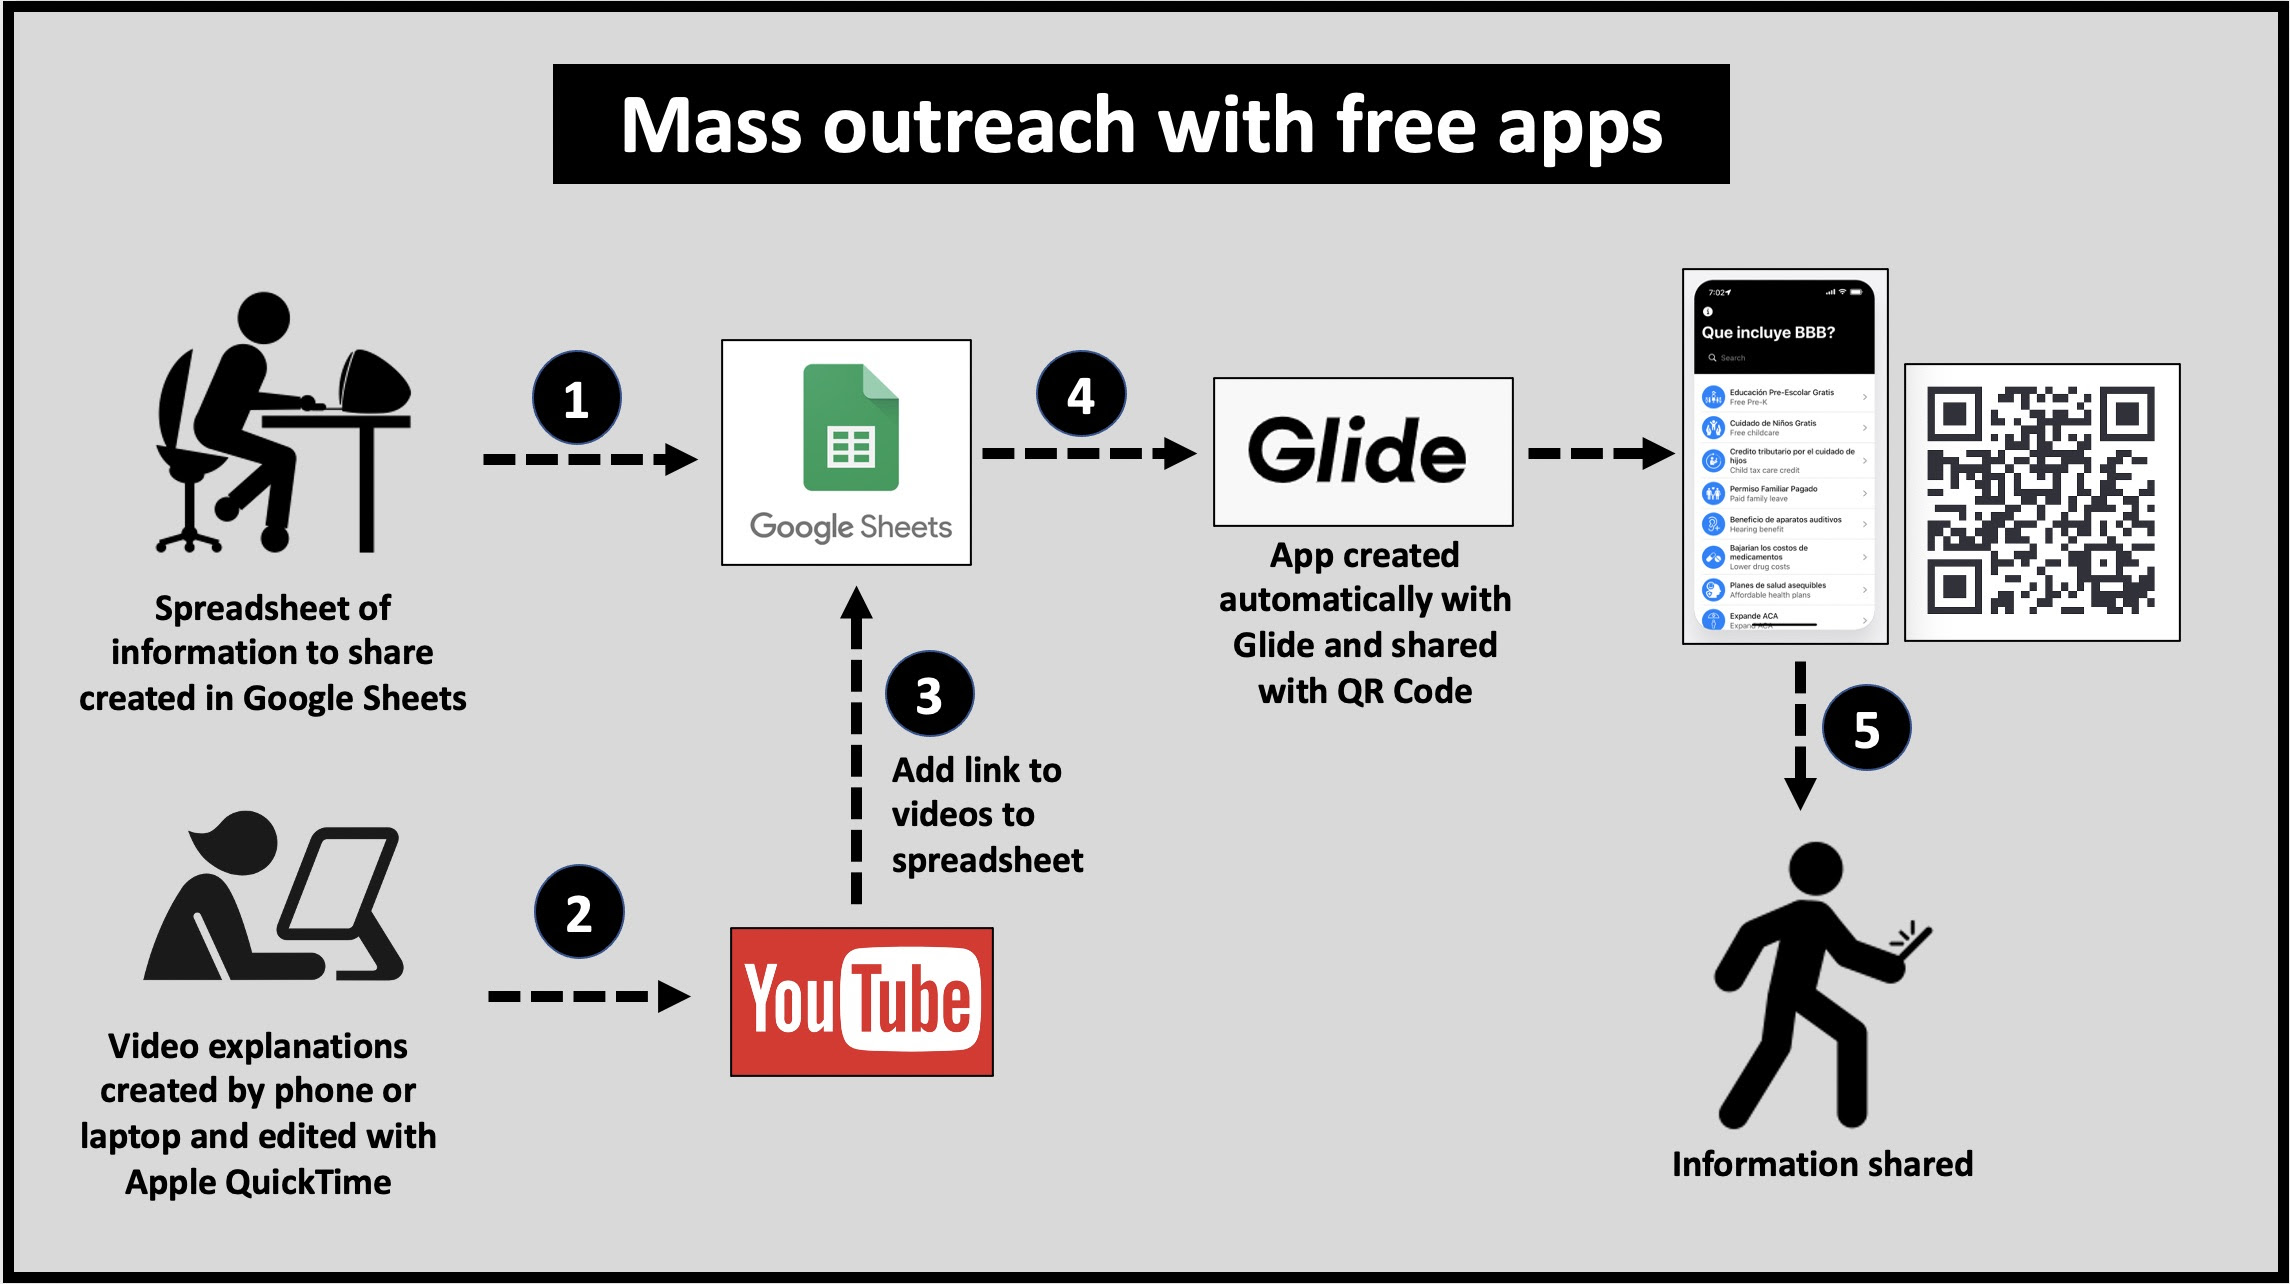 Reach more people with free apps that make it easy to package and share information.